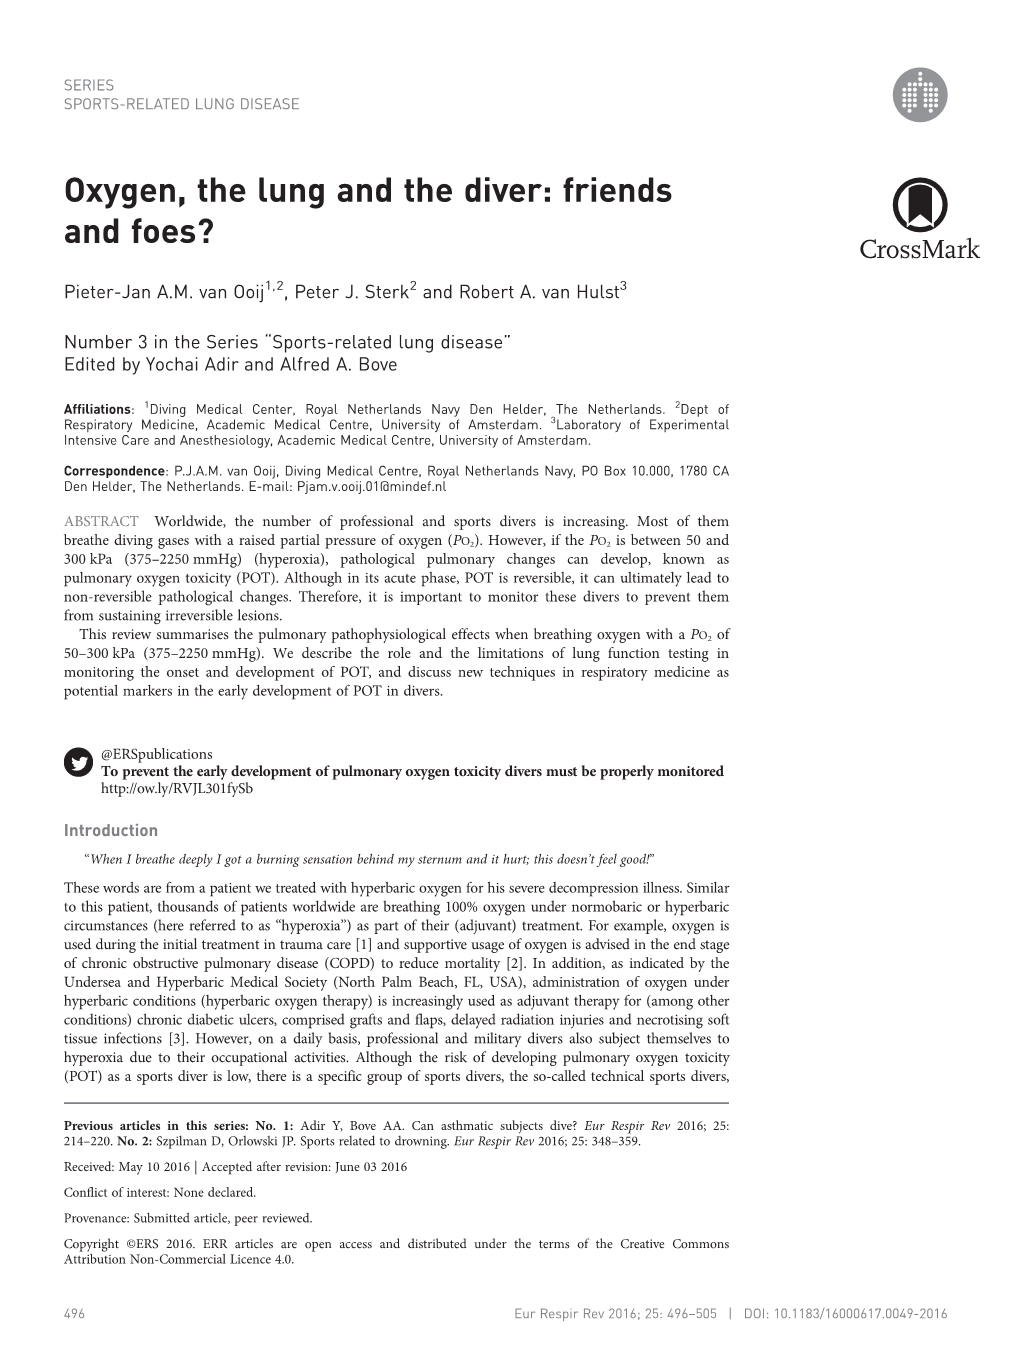 Oxygen, the Lung and the Diver: Friends and Foes?